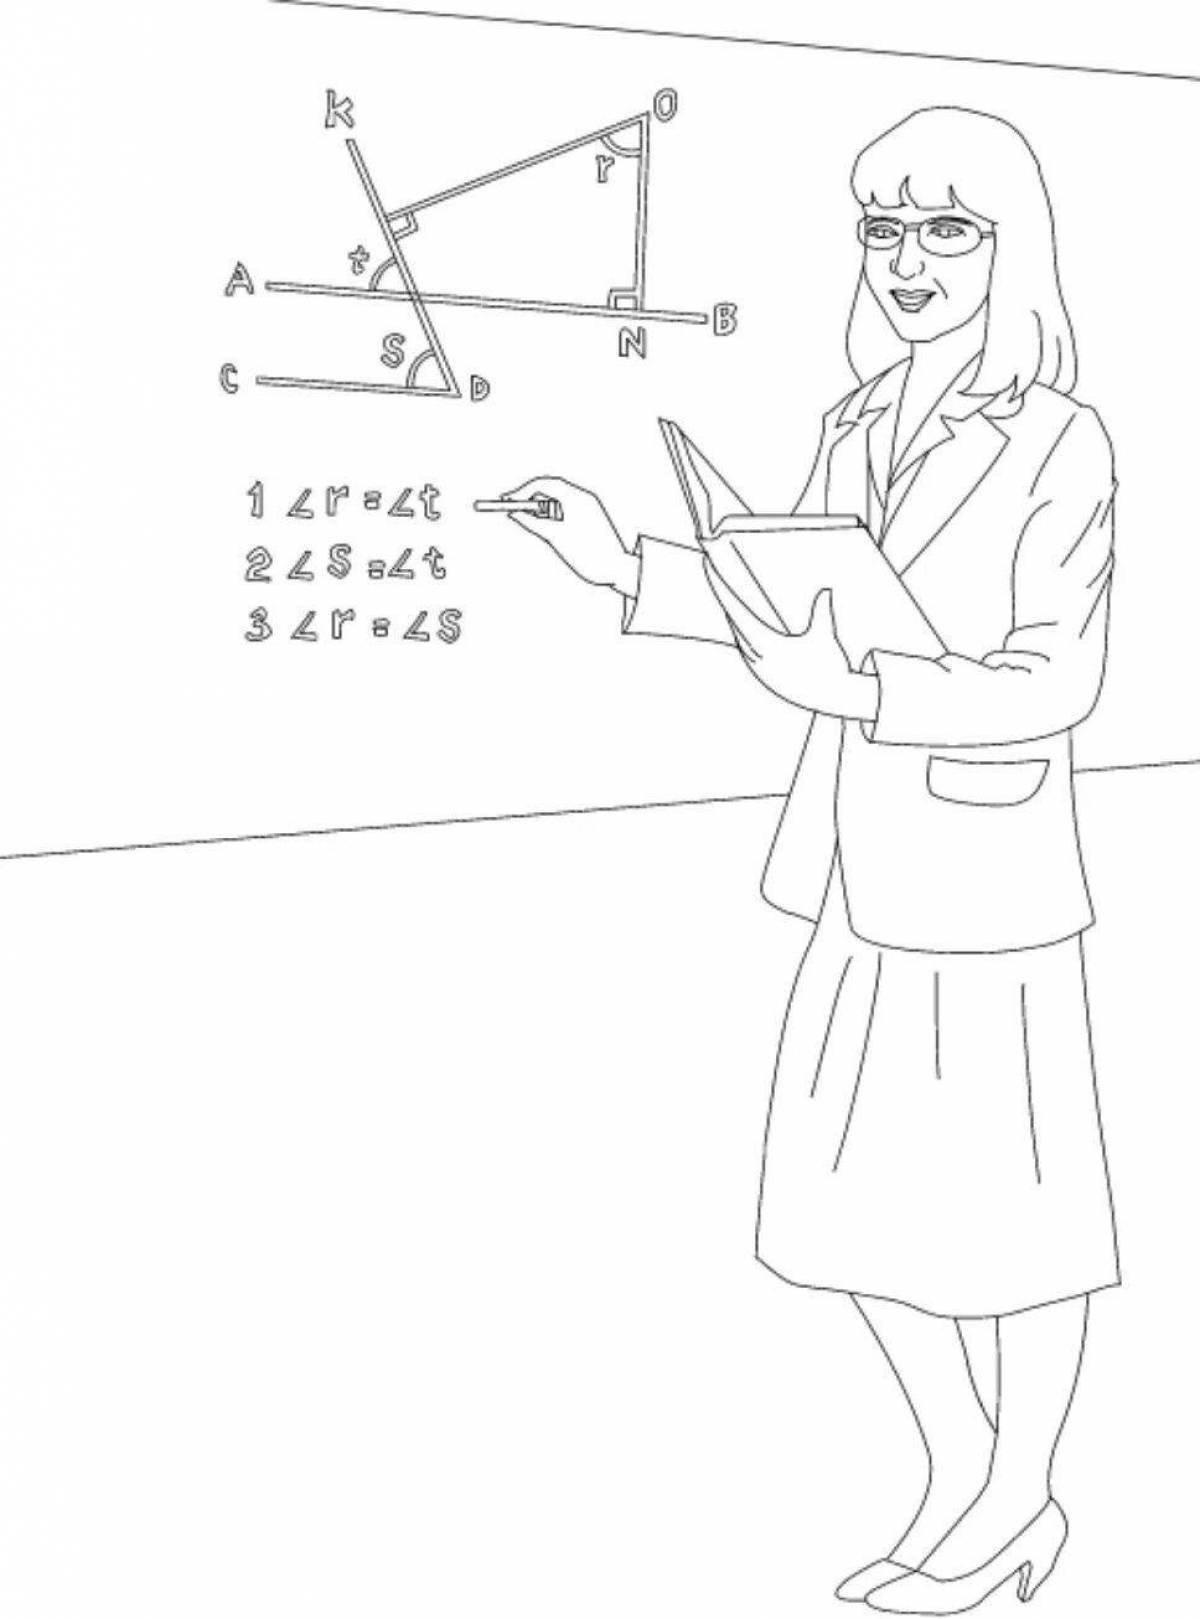 Energetic teacher at the blackboard with a pointer